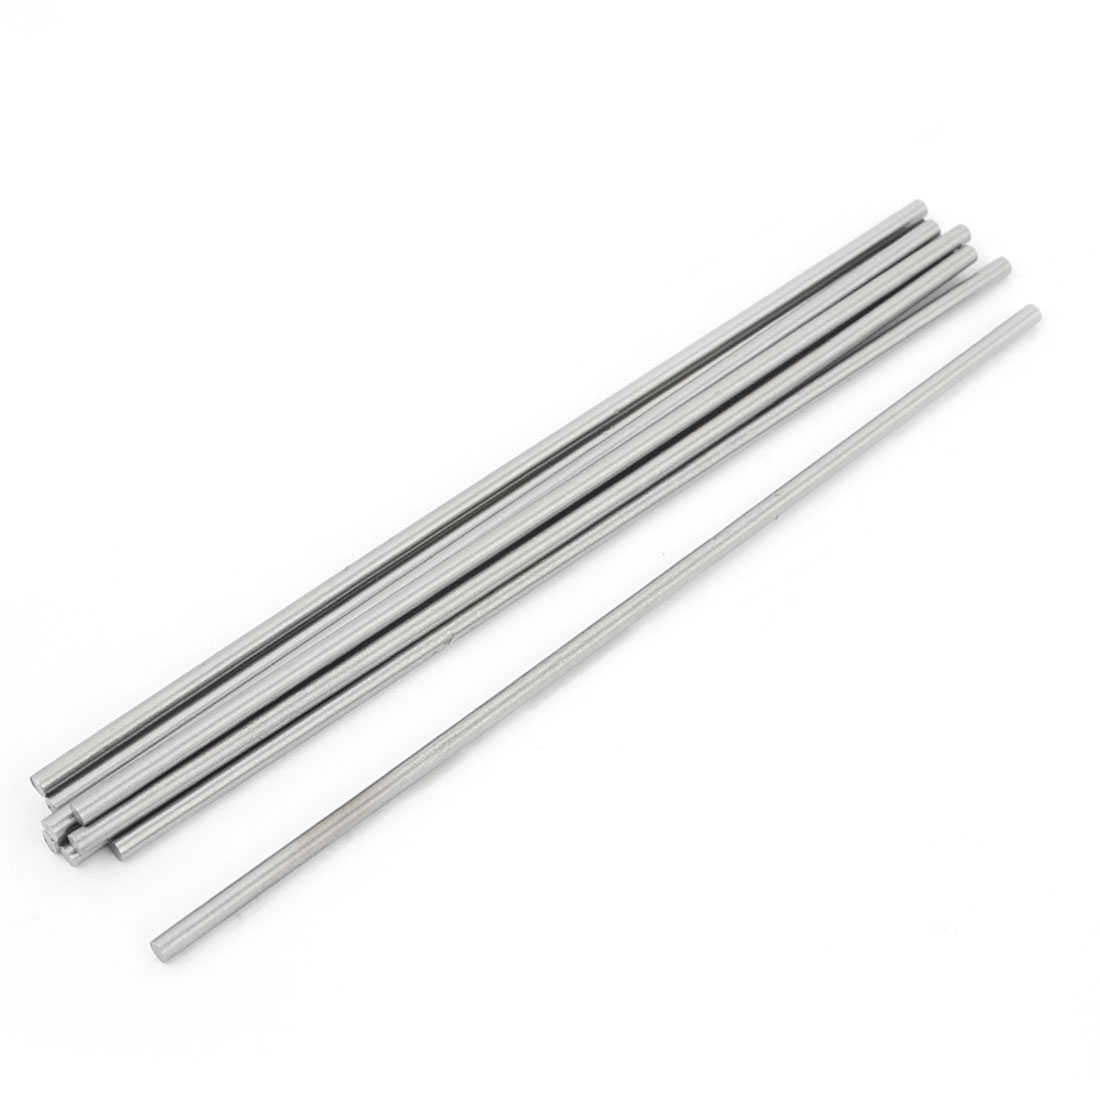 Unique Bargains 20Pcs 2mmx100mm HSS High Speed Steel Turning Carbide Bars for CNC Lathe